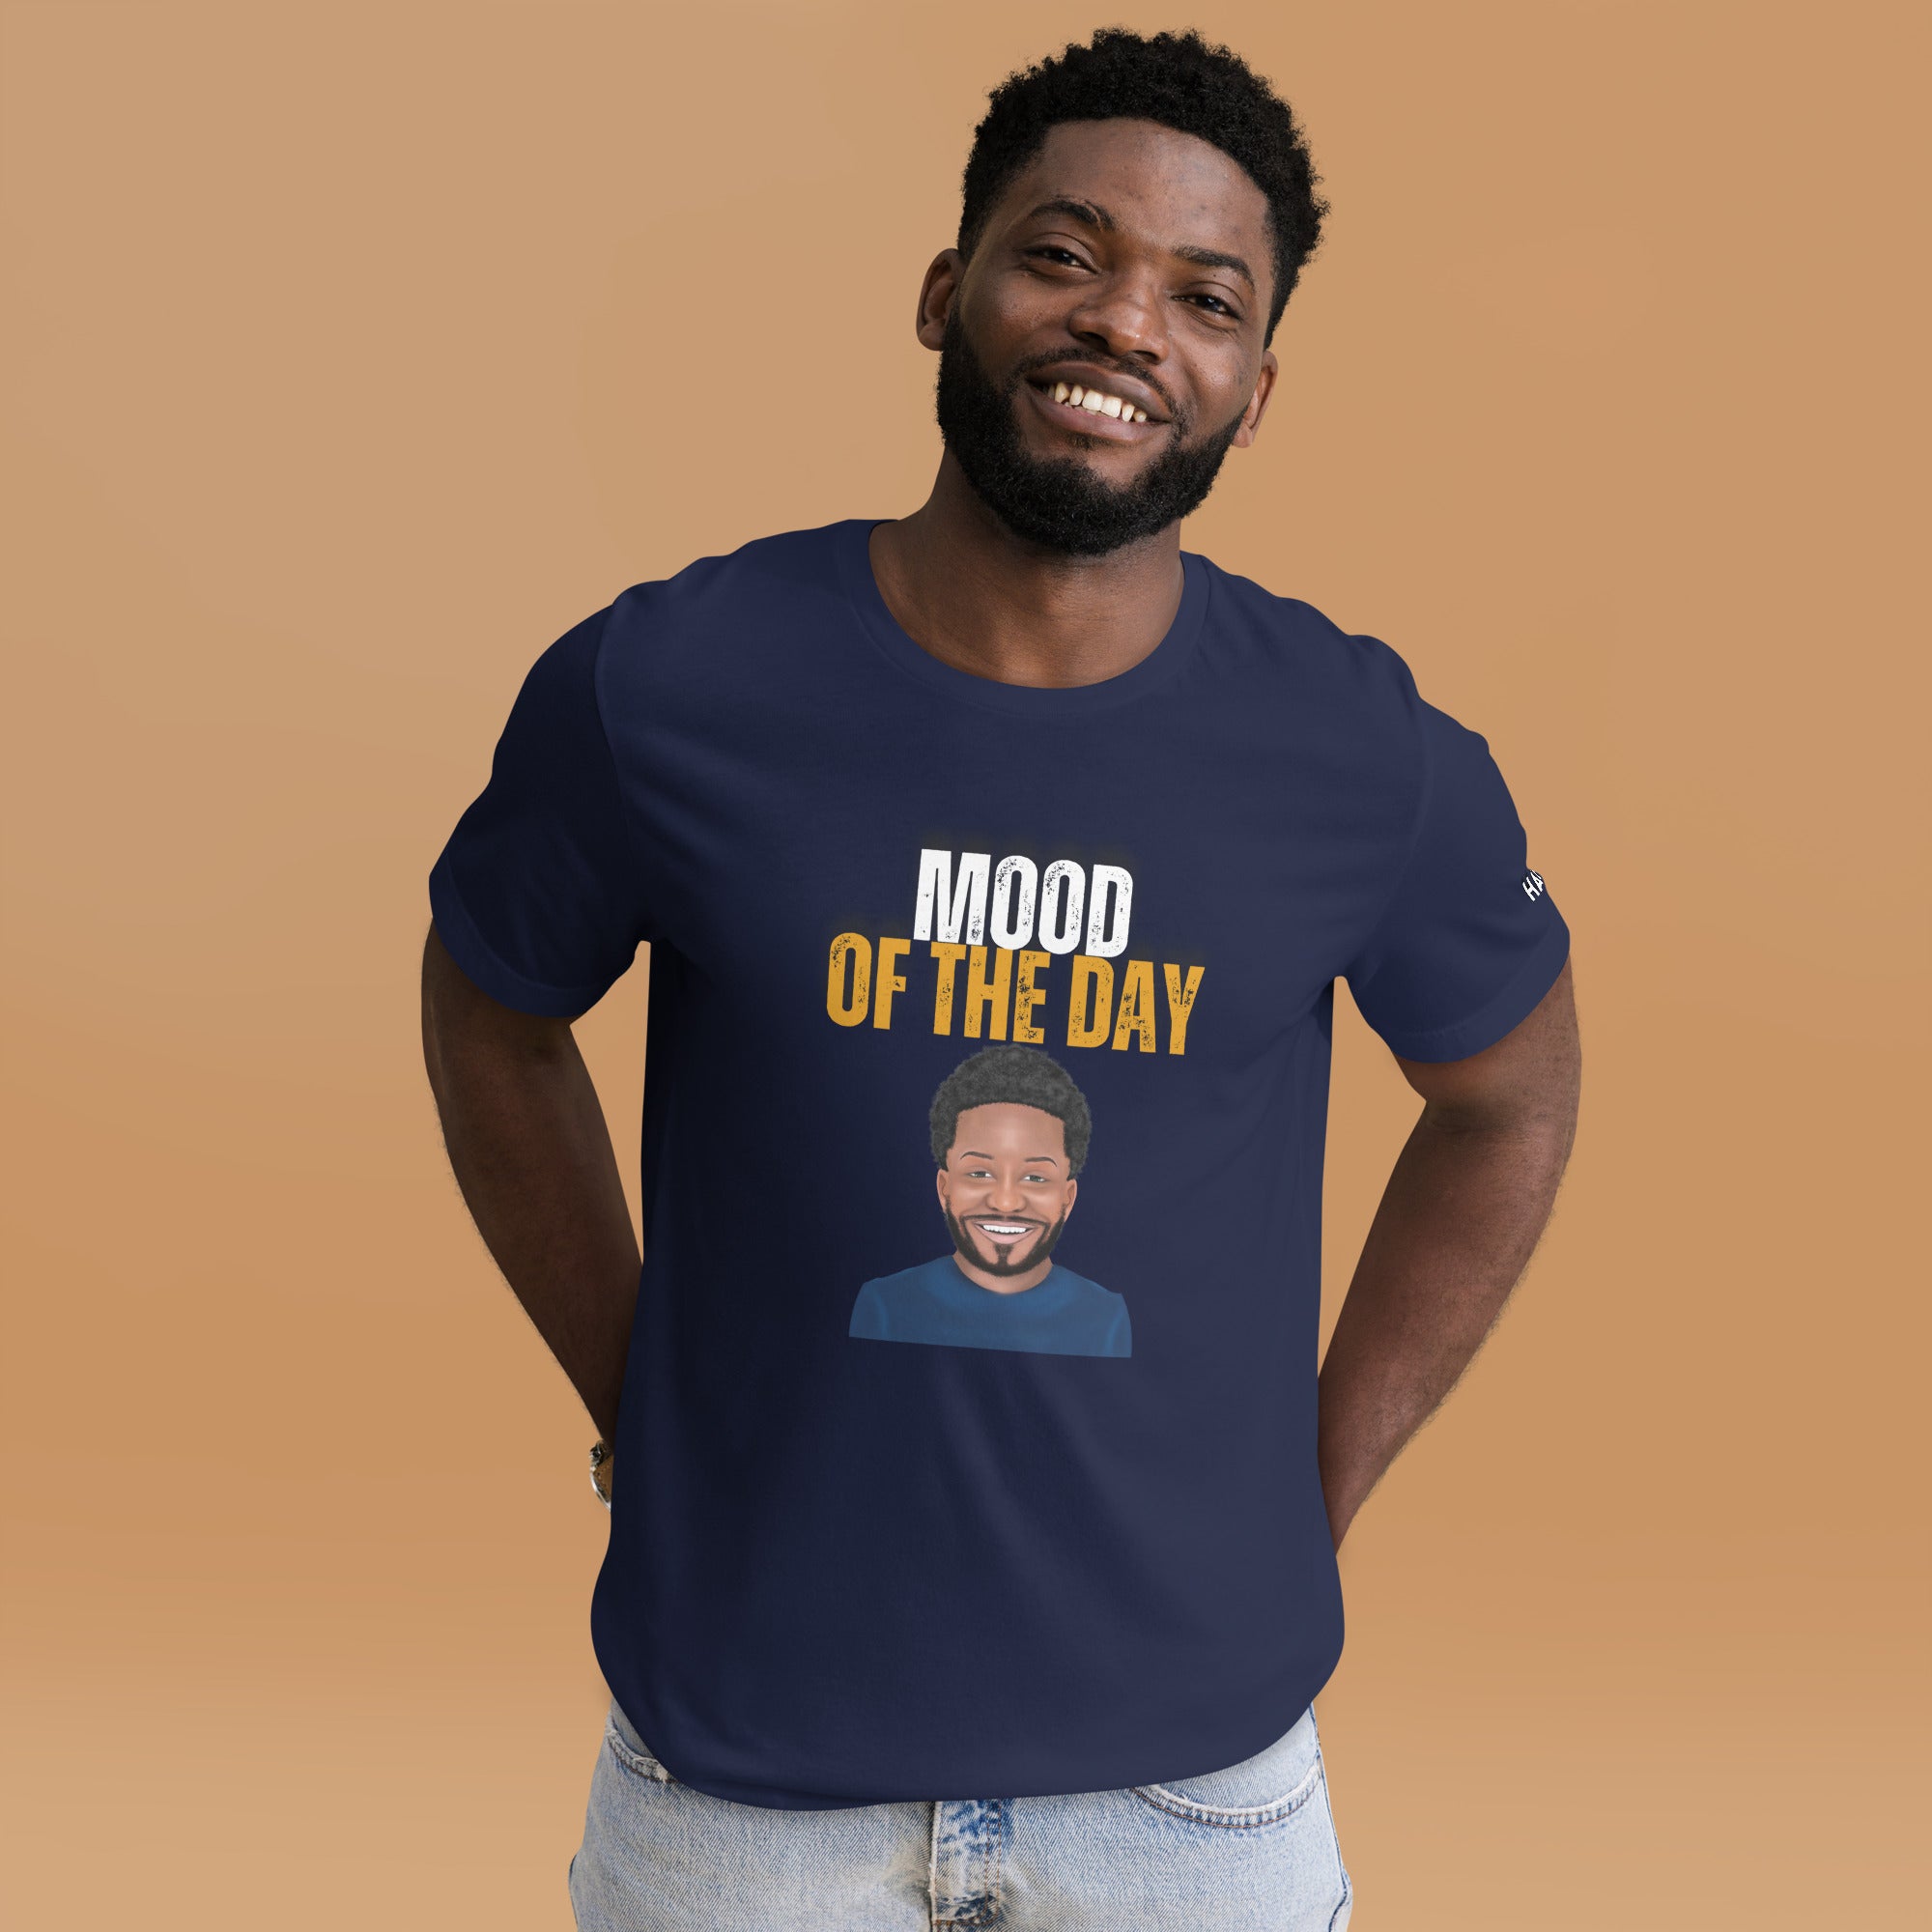 Mood of the Day T-shirt - Happy (Man)